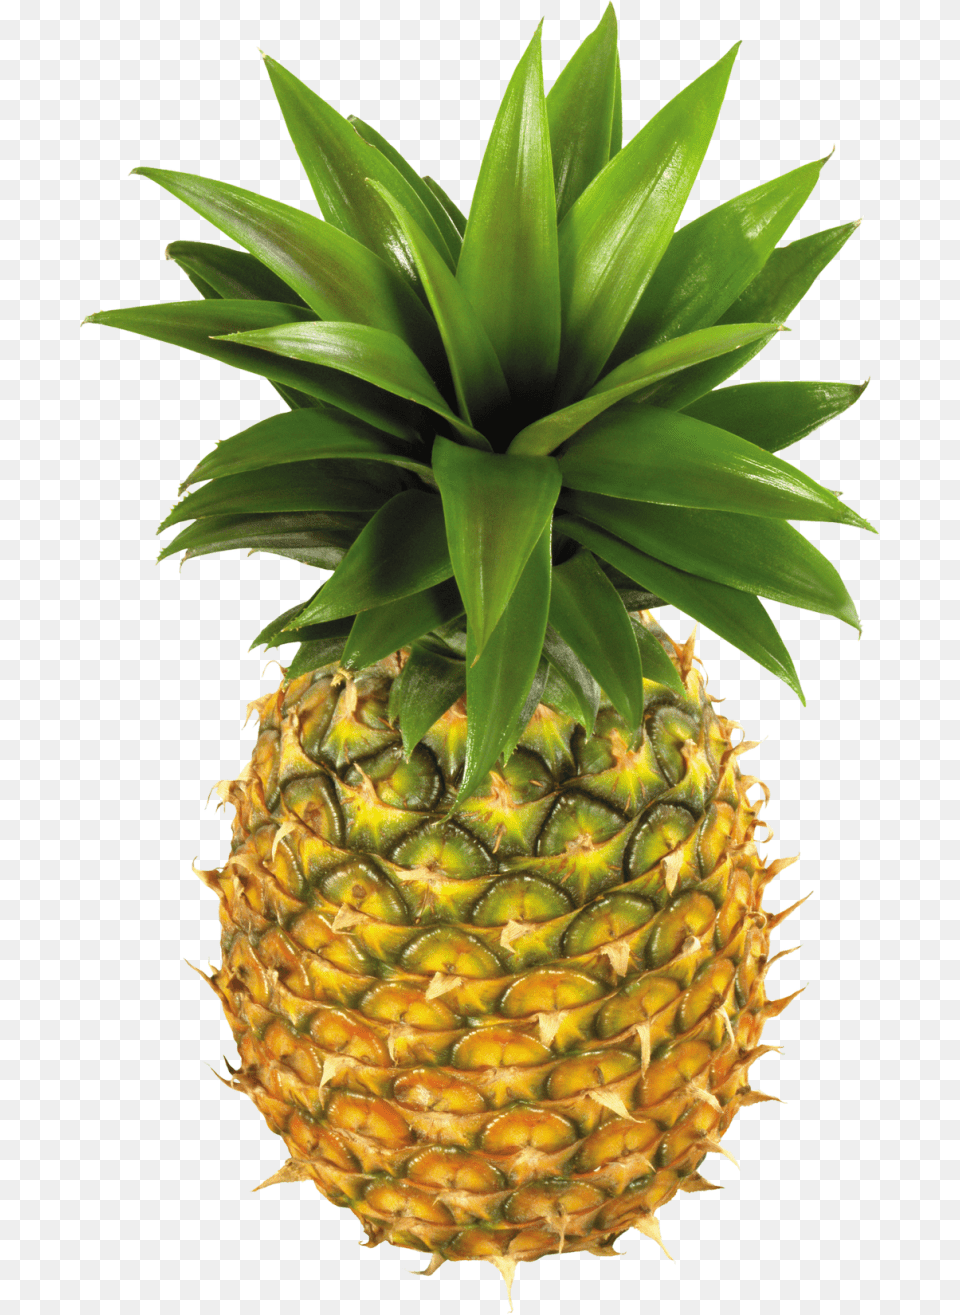 Pineapple Image Pineapples, Food, Fruit, Plant, Produce Free Png